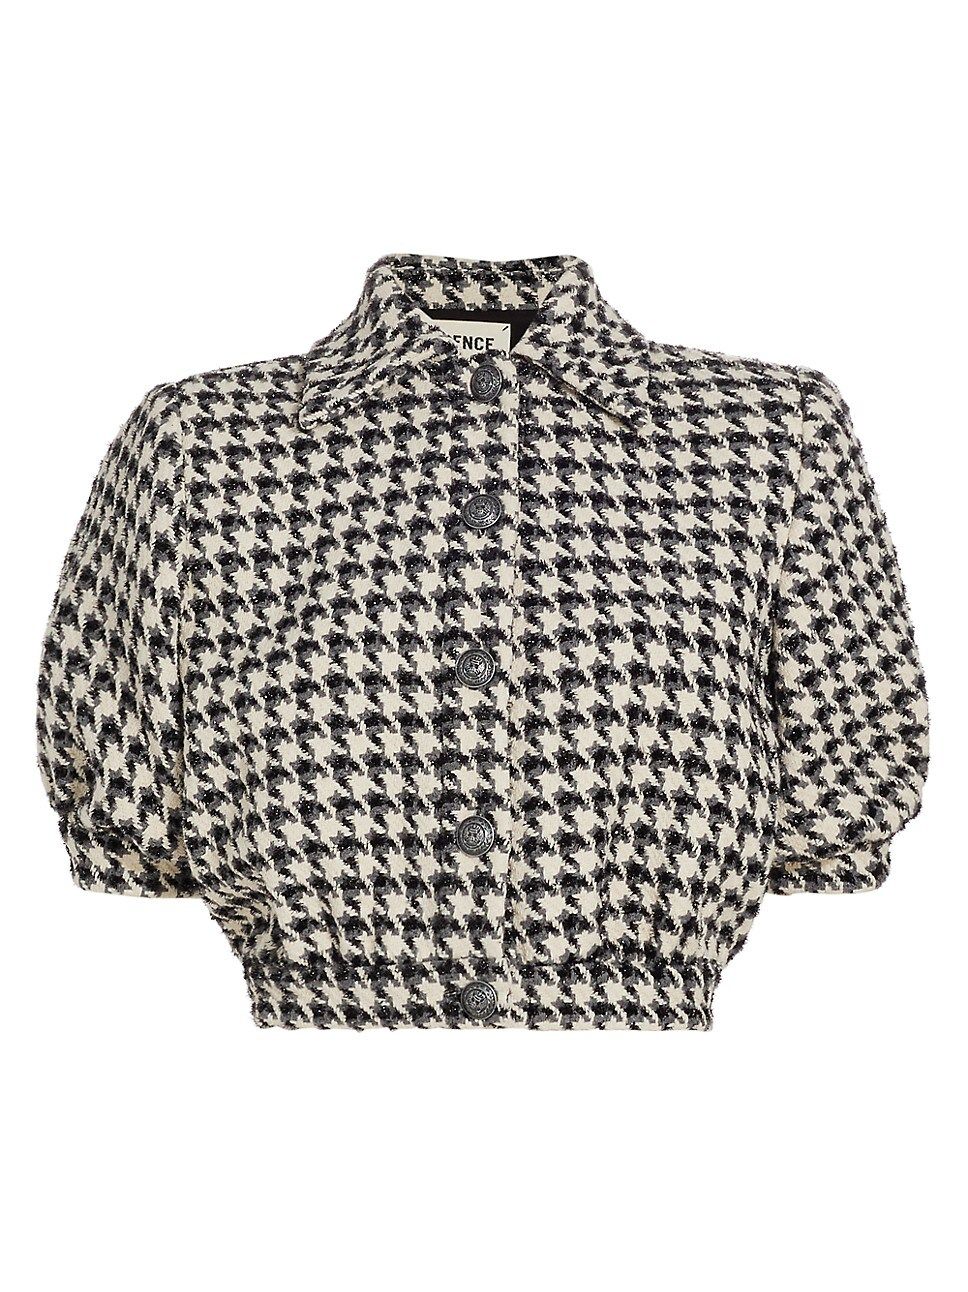 Cove Houndstooth Cropped Jacket | Saks Fifth Avenue